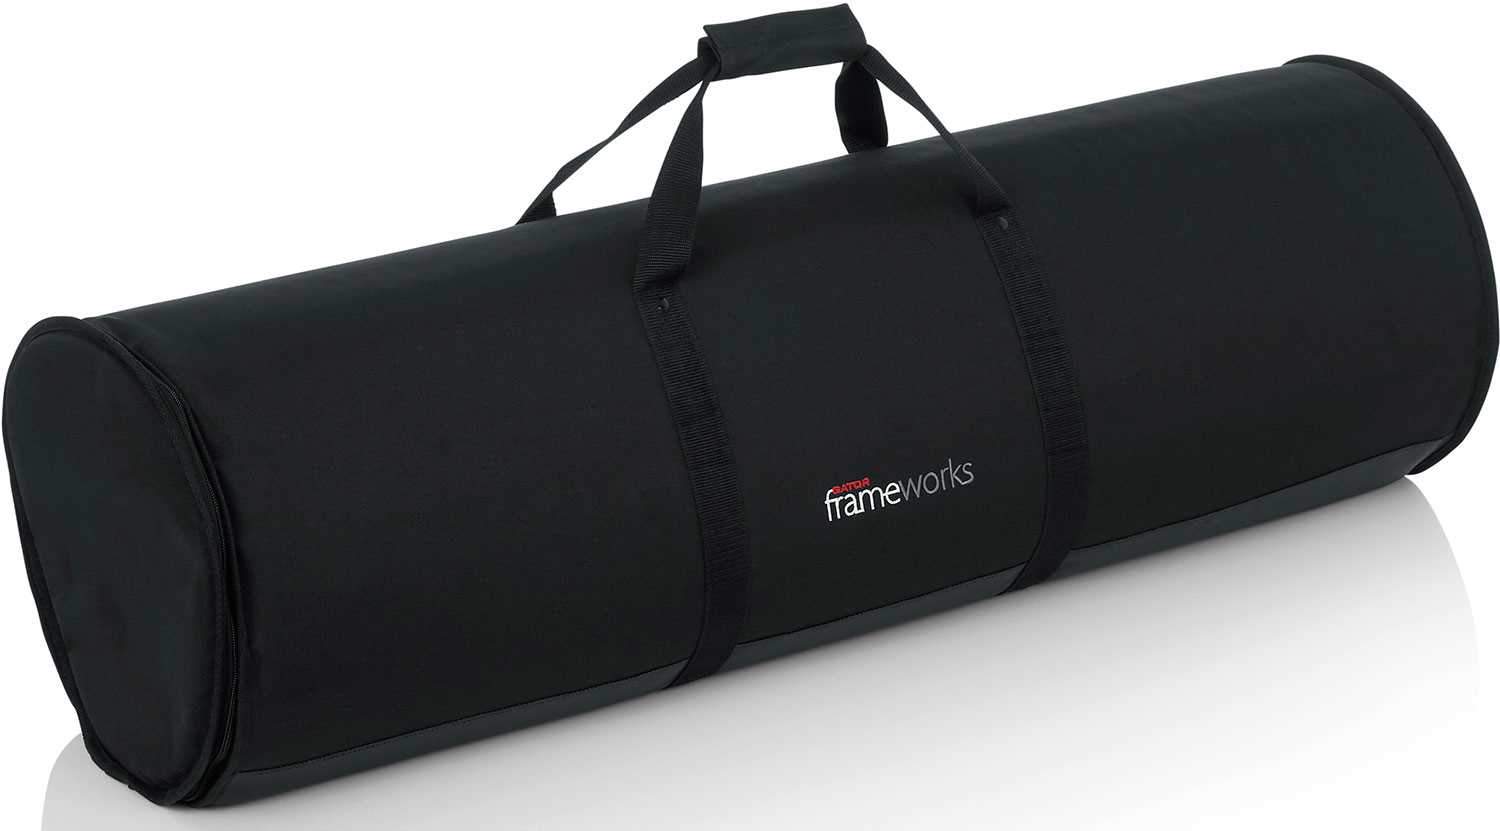 Gator Frameworks Carry Bag for Six Mic Stands - ProSound and Stage Lighting